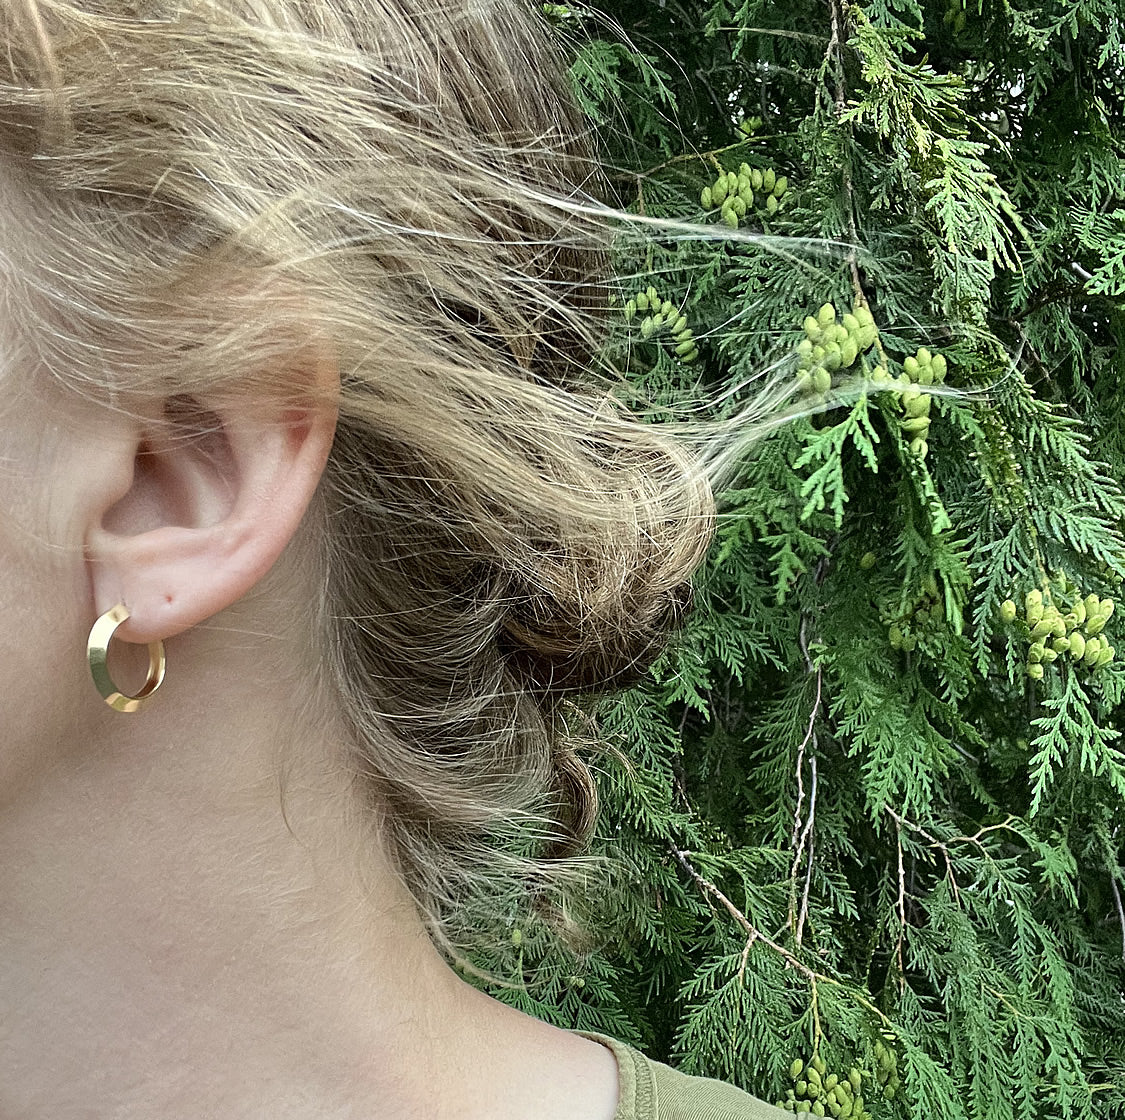 gold hoop earrings in a person's ear with a tree in the background